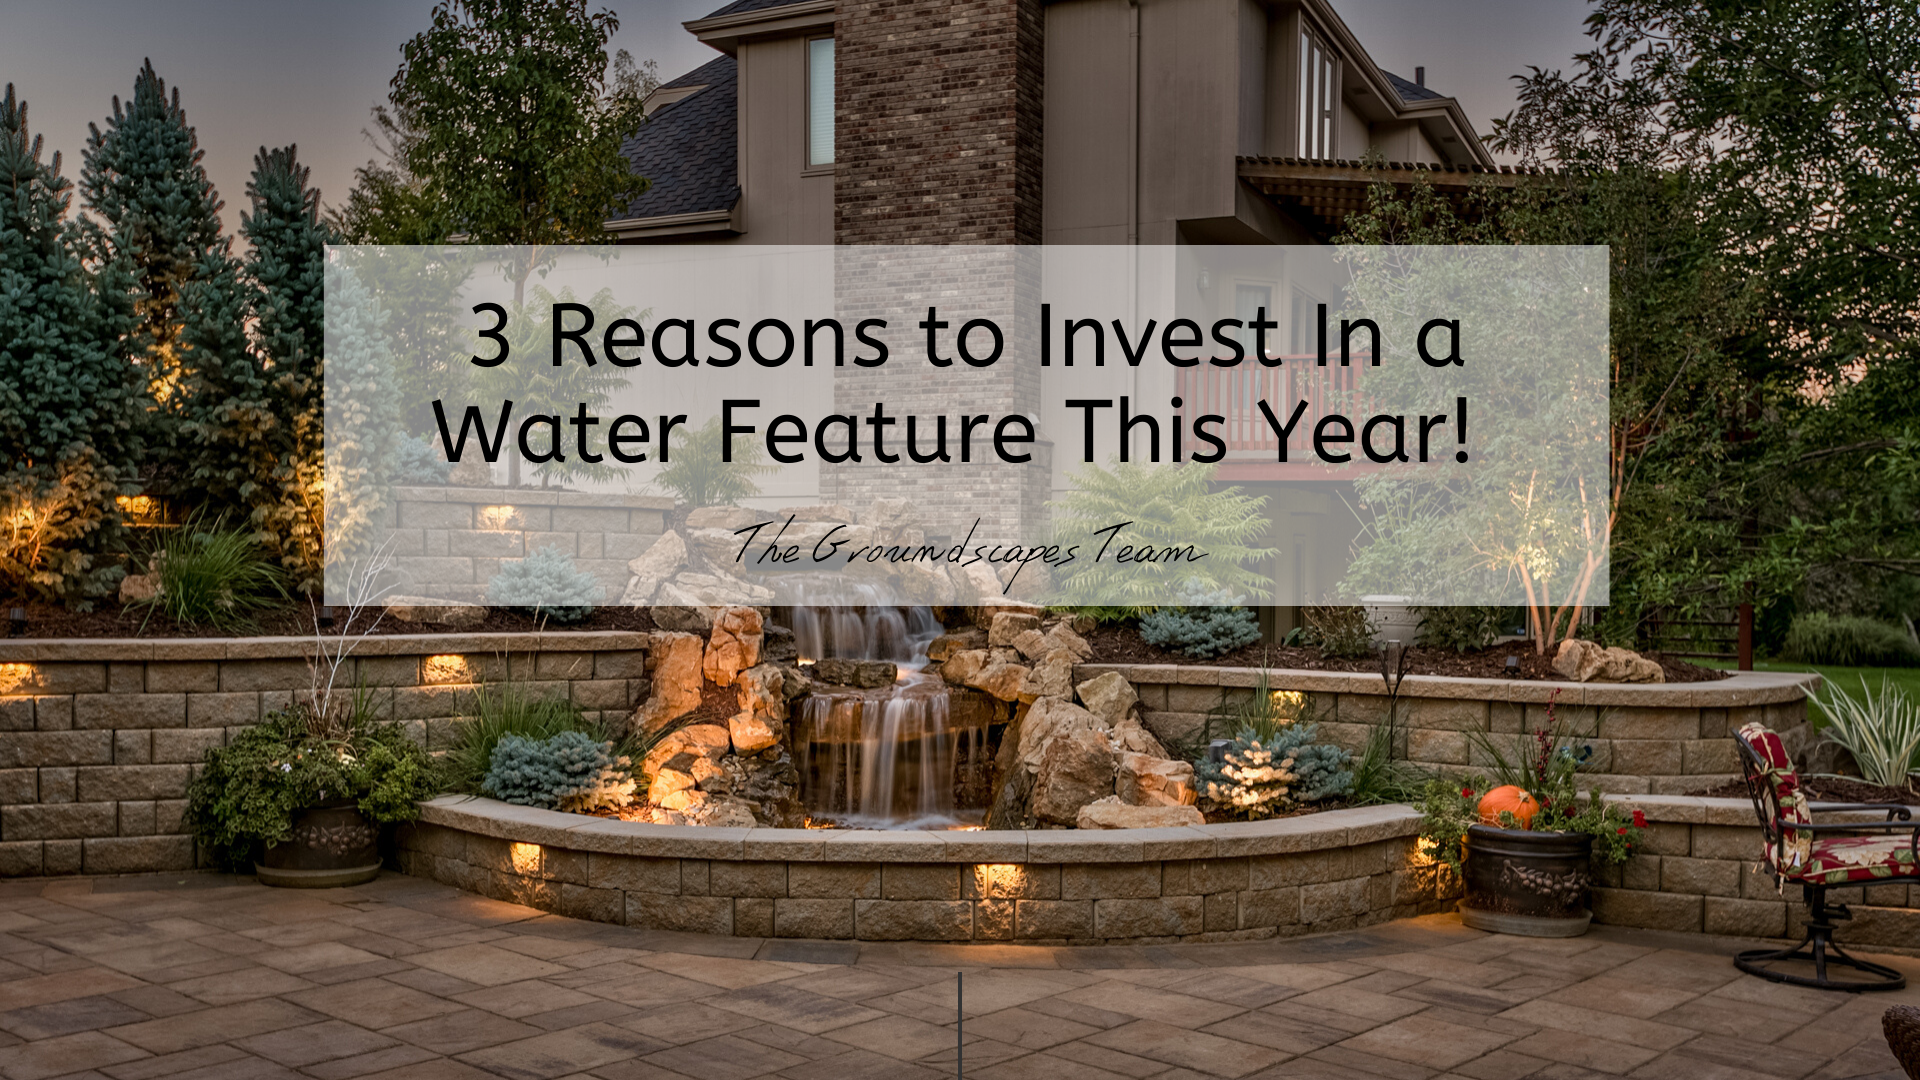 3 Reasons to Invest In a Water Feature This Year!